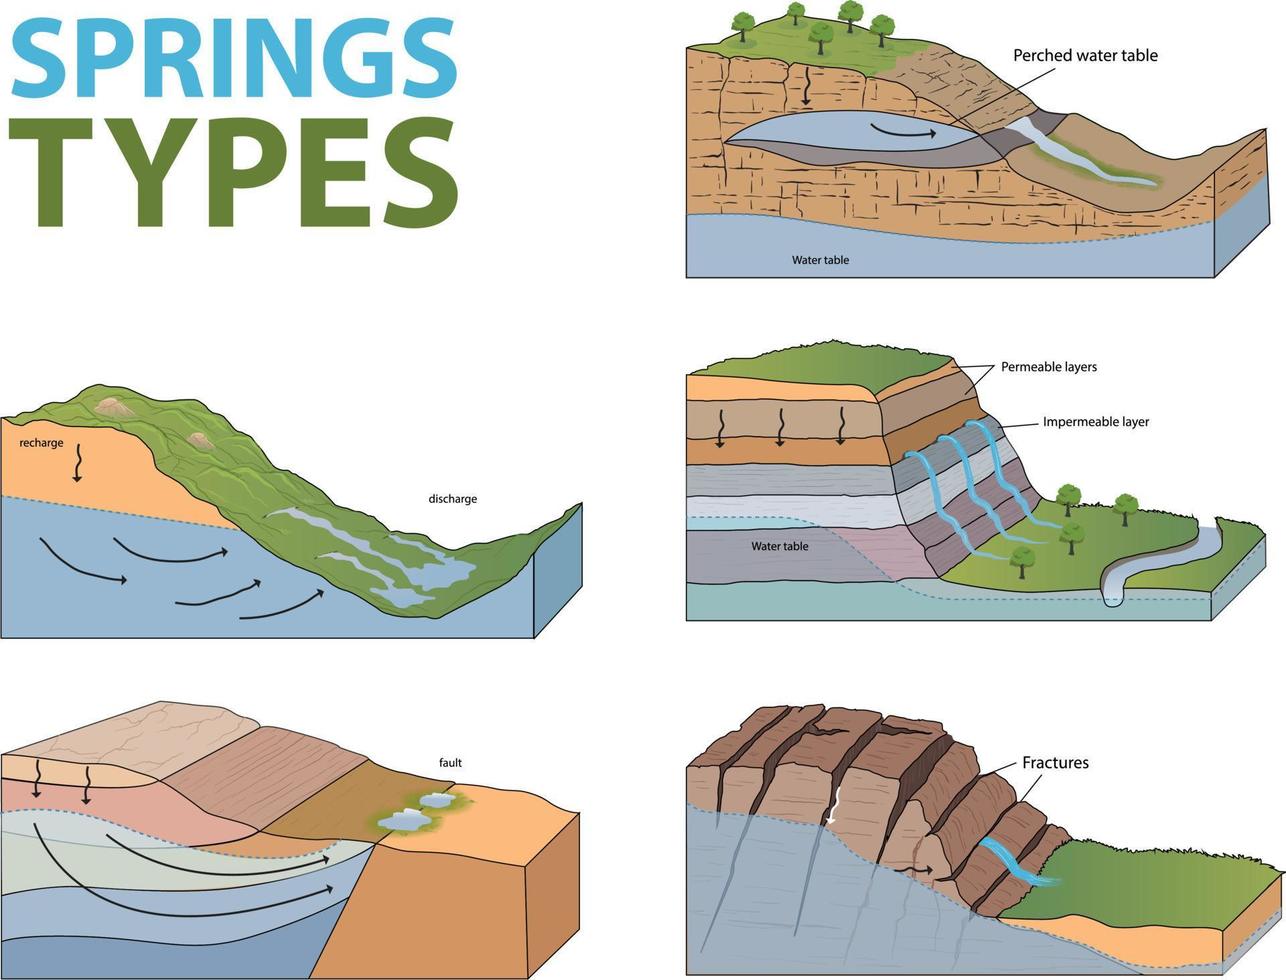 illustration of springs types in geology vector